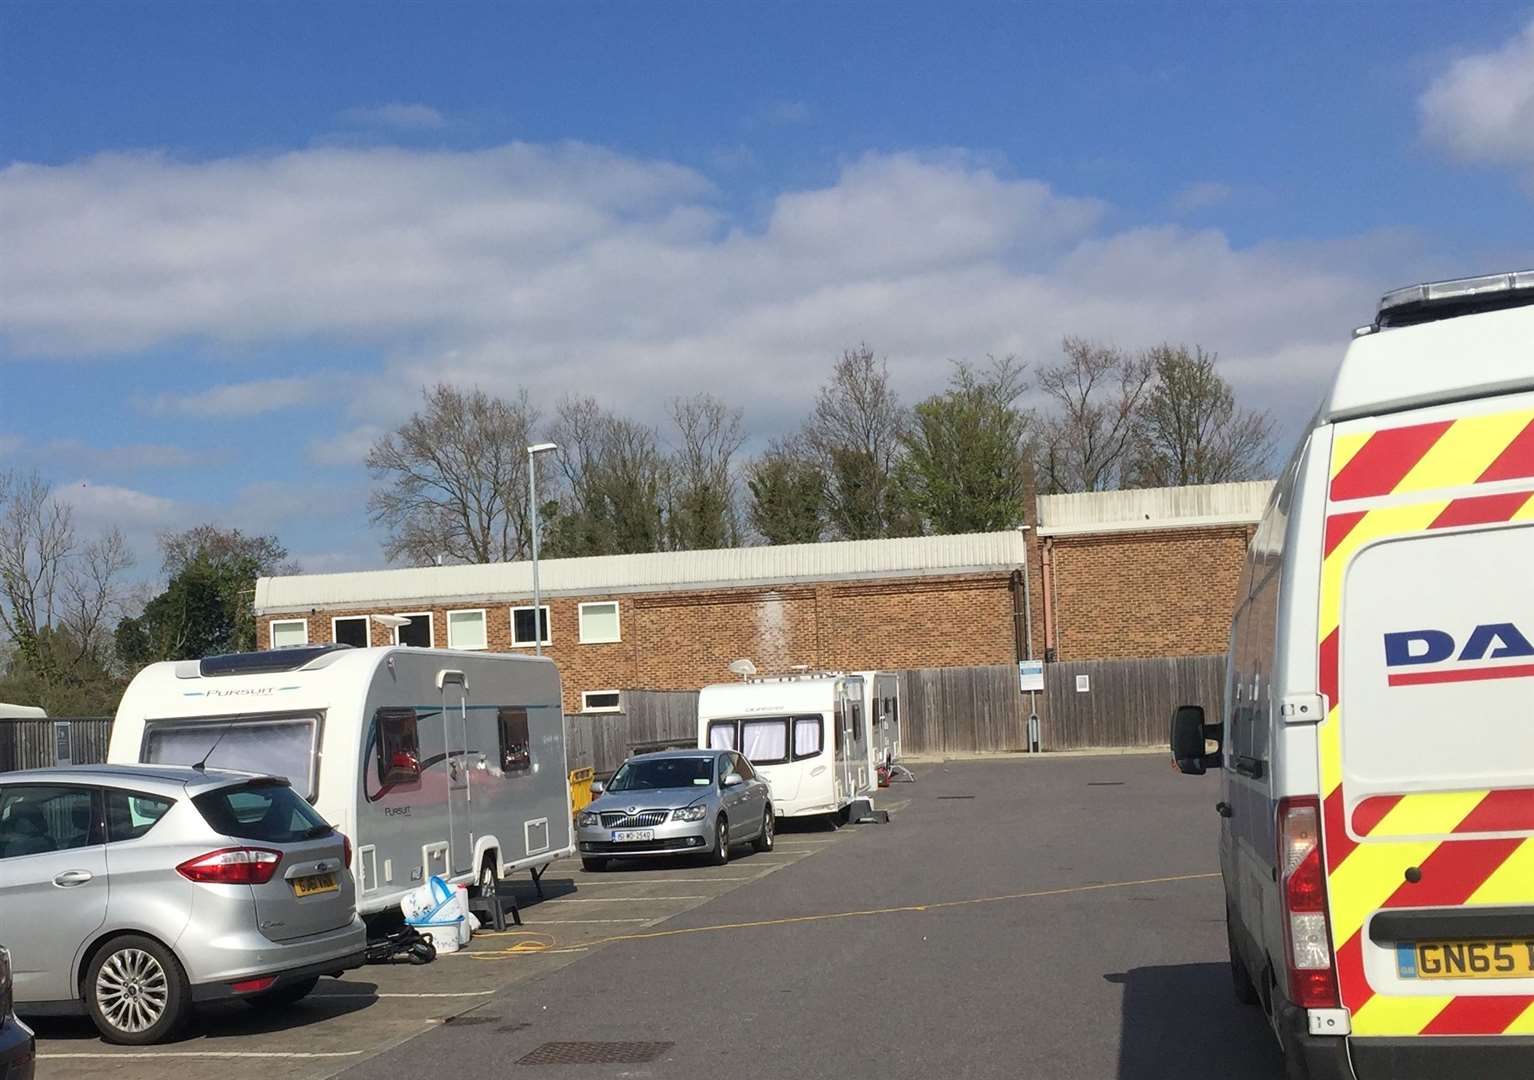 Caravans have pitched up in the car park of Lidl in Sevenoaks. Picture Alex Jee (8466873)